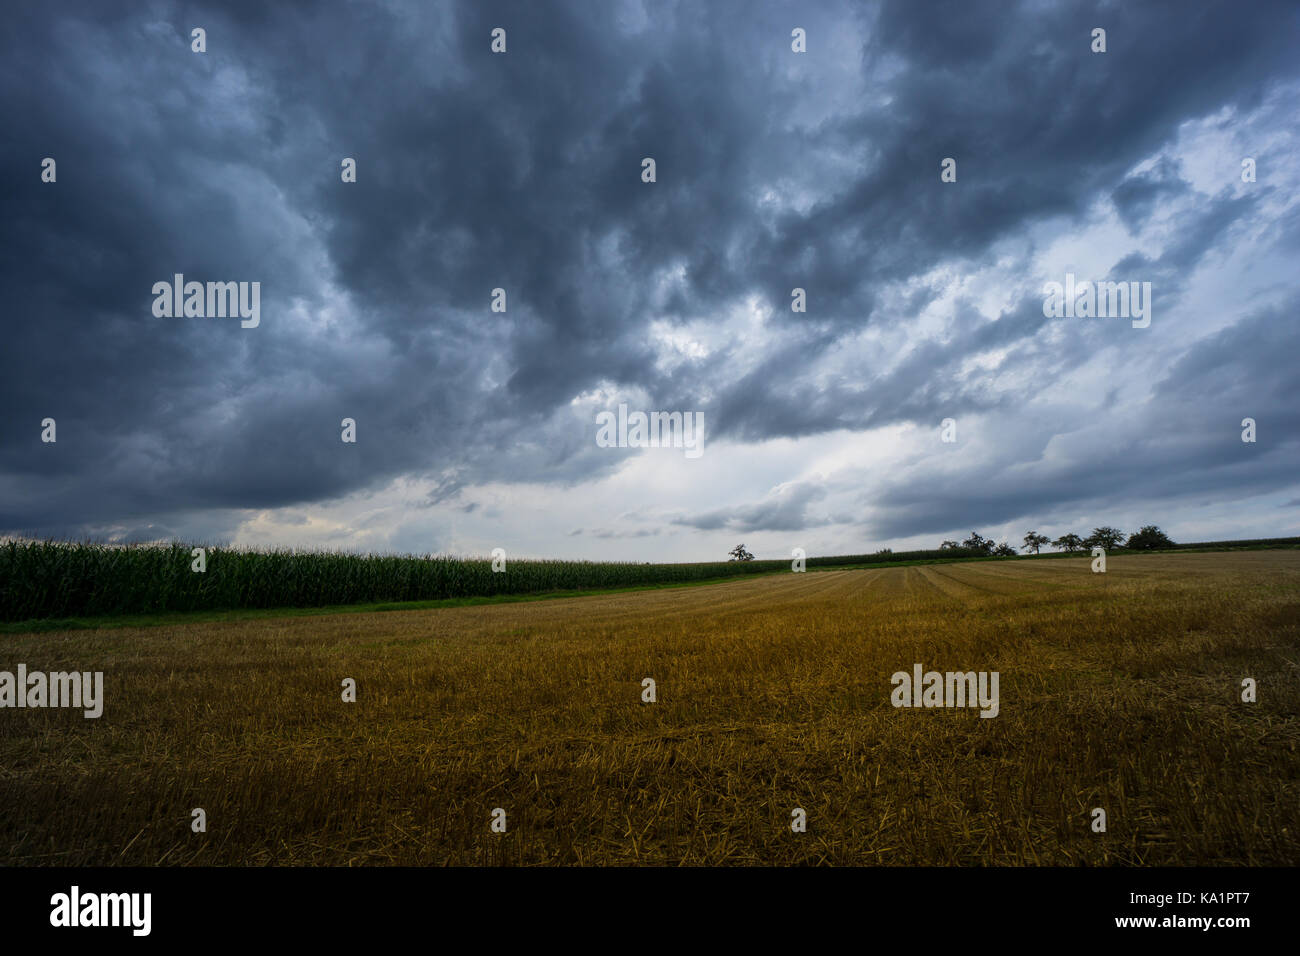 Thunderstorm with dramatic sky and cloud formations over harvested grainfield Stock Photo